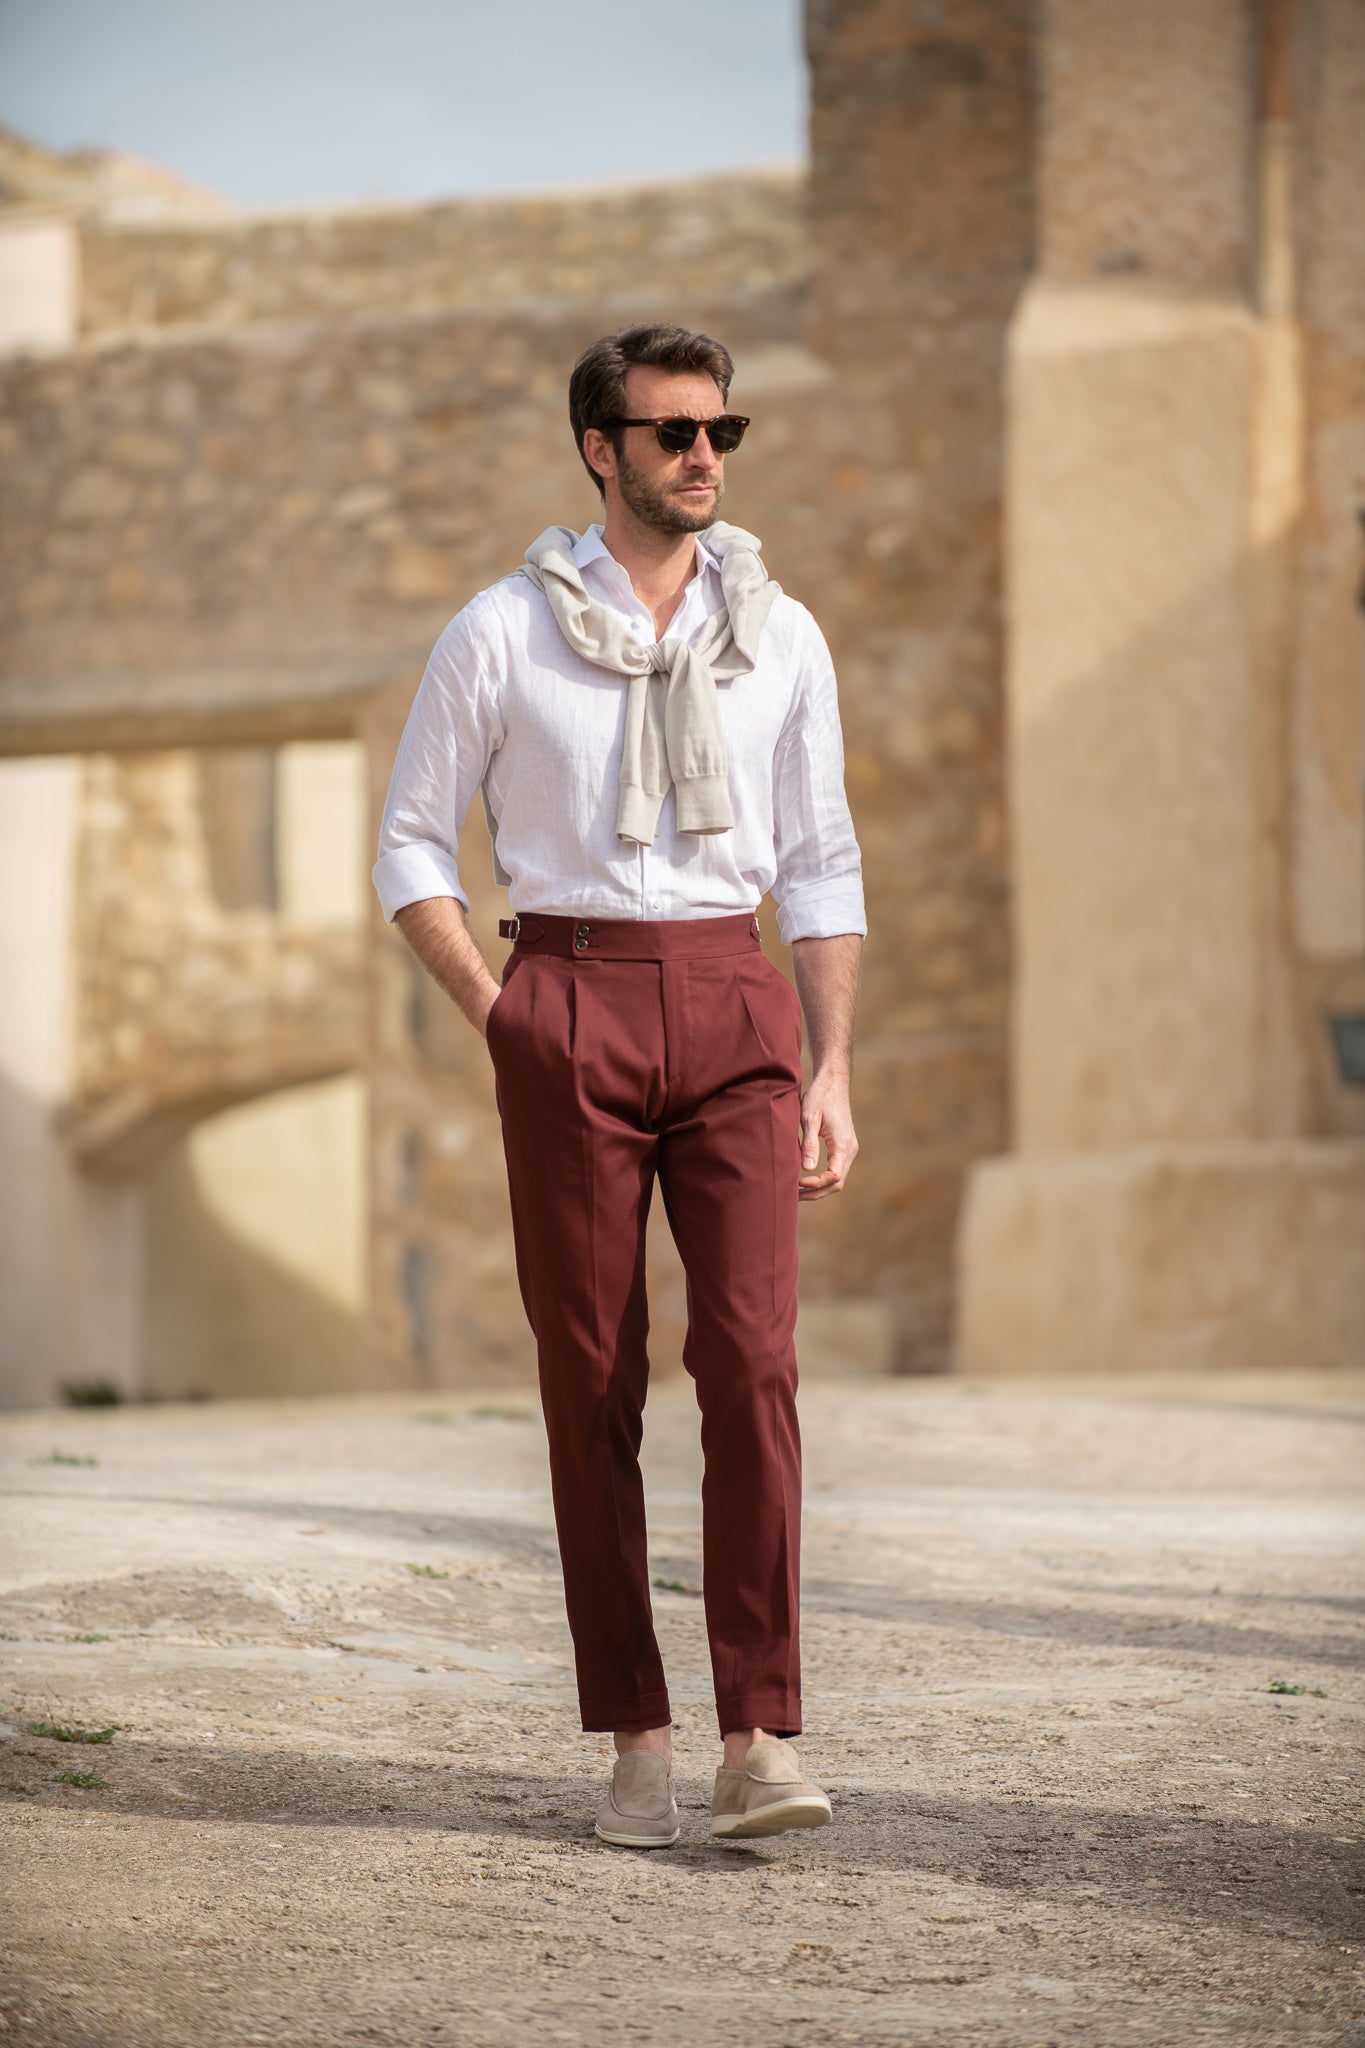 What Color Pants Go With A Maroon Shirt Pics  Ready Sleek